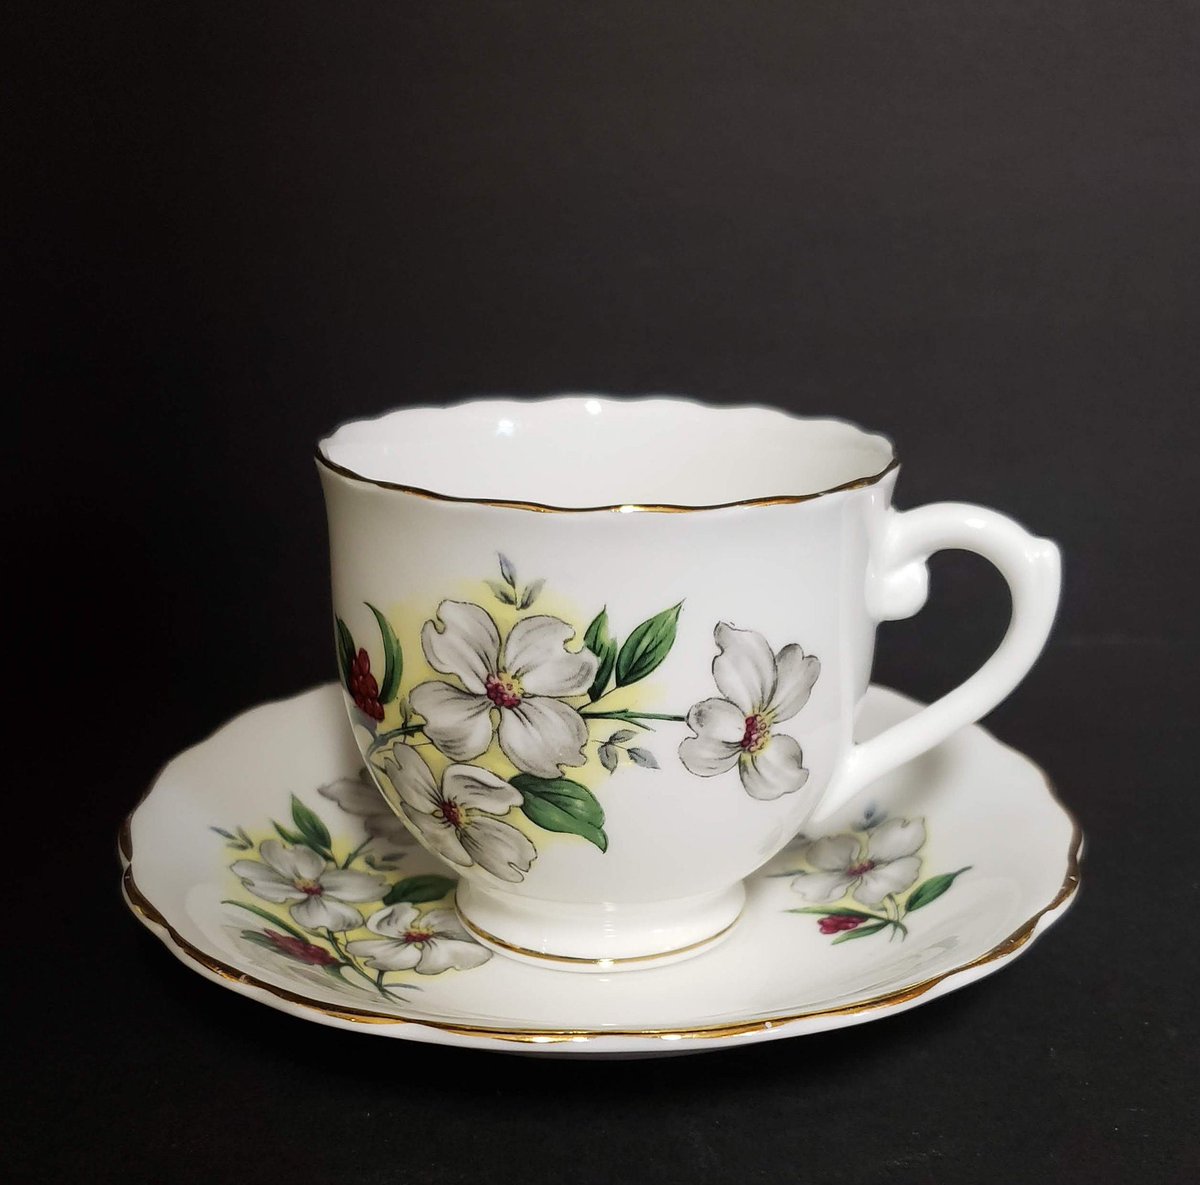 Vintage Taylor & Kent Fine Bone China Teacup and Saucer, Dogwood and Berries Pattern, Gold Trim, Made in England, Decor Dining Bridal, Prop tuppu.net/d9a62281 #AmazingFunVintage #Etsy #FineBoneChina